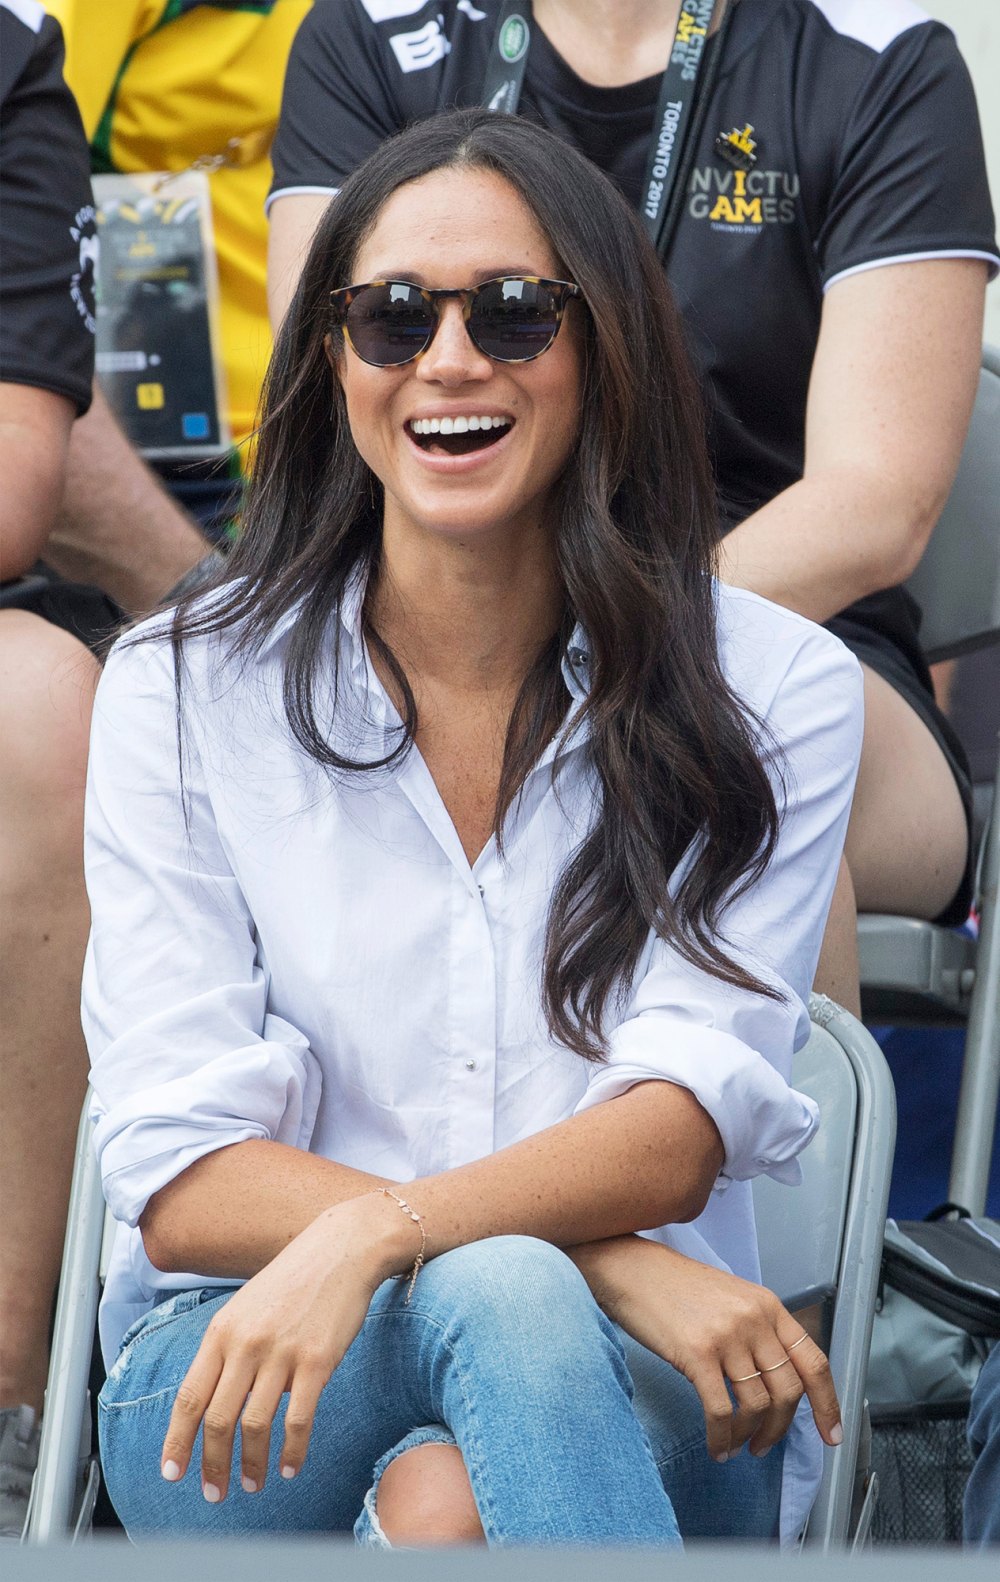 Ultimate Royal Holiday Gift Guide- Princess Kate’s Go-To Gloves, Meghan Markle’s Signature Shades and More! 400 Prince Harry. Invictus Games 2017: Picture Mark Large .... 25.09.17 Prince Harry Attends The Wheel Chair Tennis With Girlfriend Meghan Markle At Nathan Phillips Square Toronto.